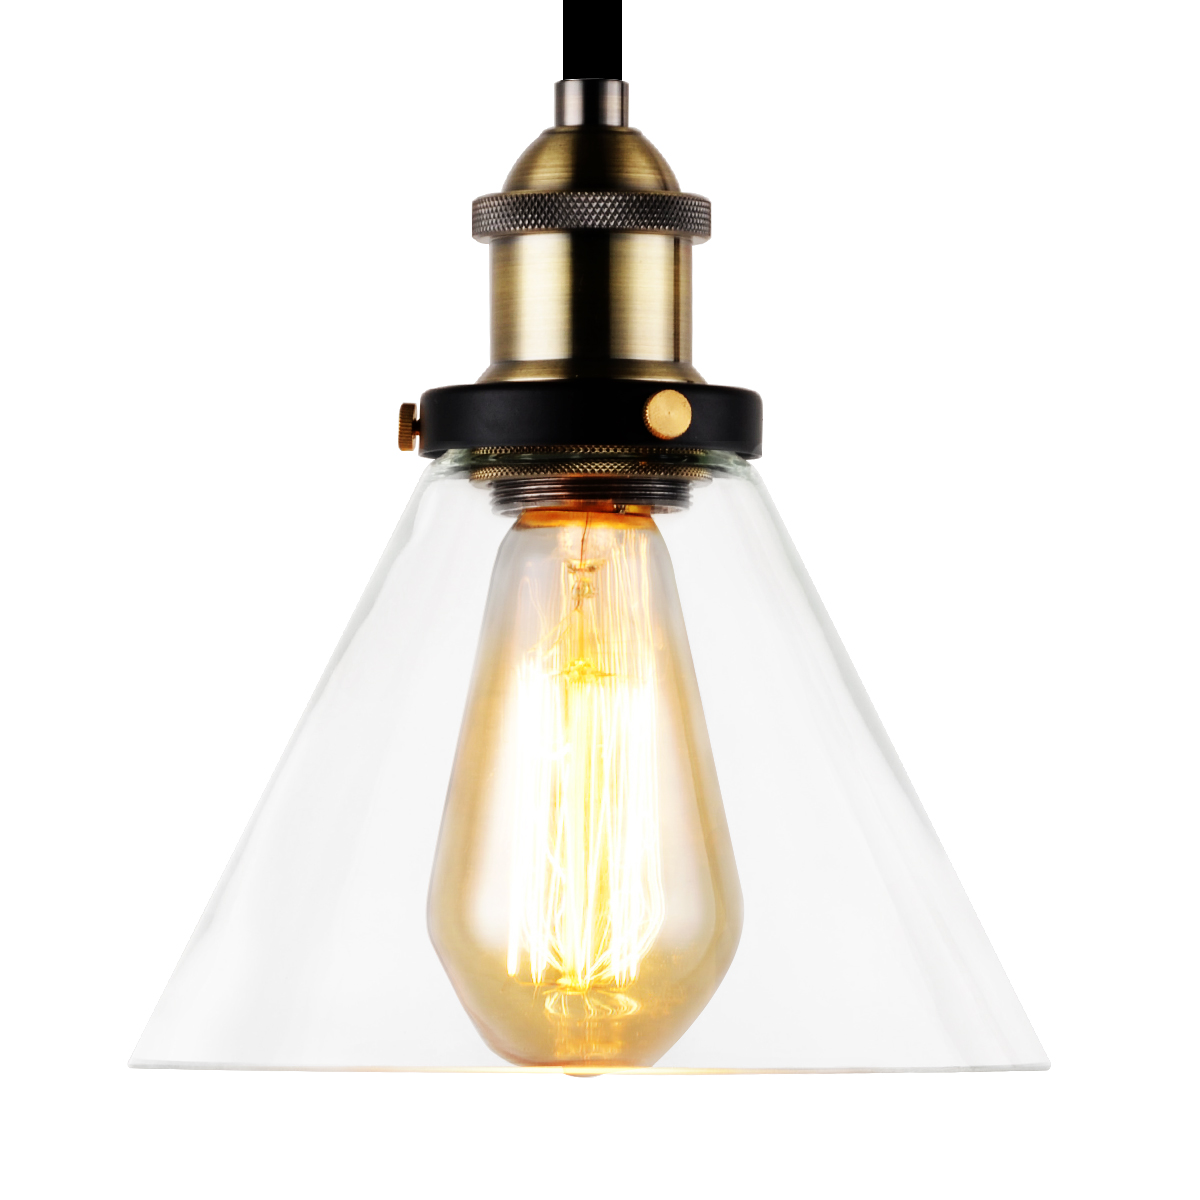 Find KingSo 110V/220V E26/E27 Vintage Industrial Pendant Light Socket Funnel-like Glass Shade with Ceiling Canopy Adjustable Hard Wire for Sale on Gipsybee.com with cryptocurrencies